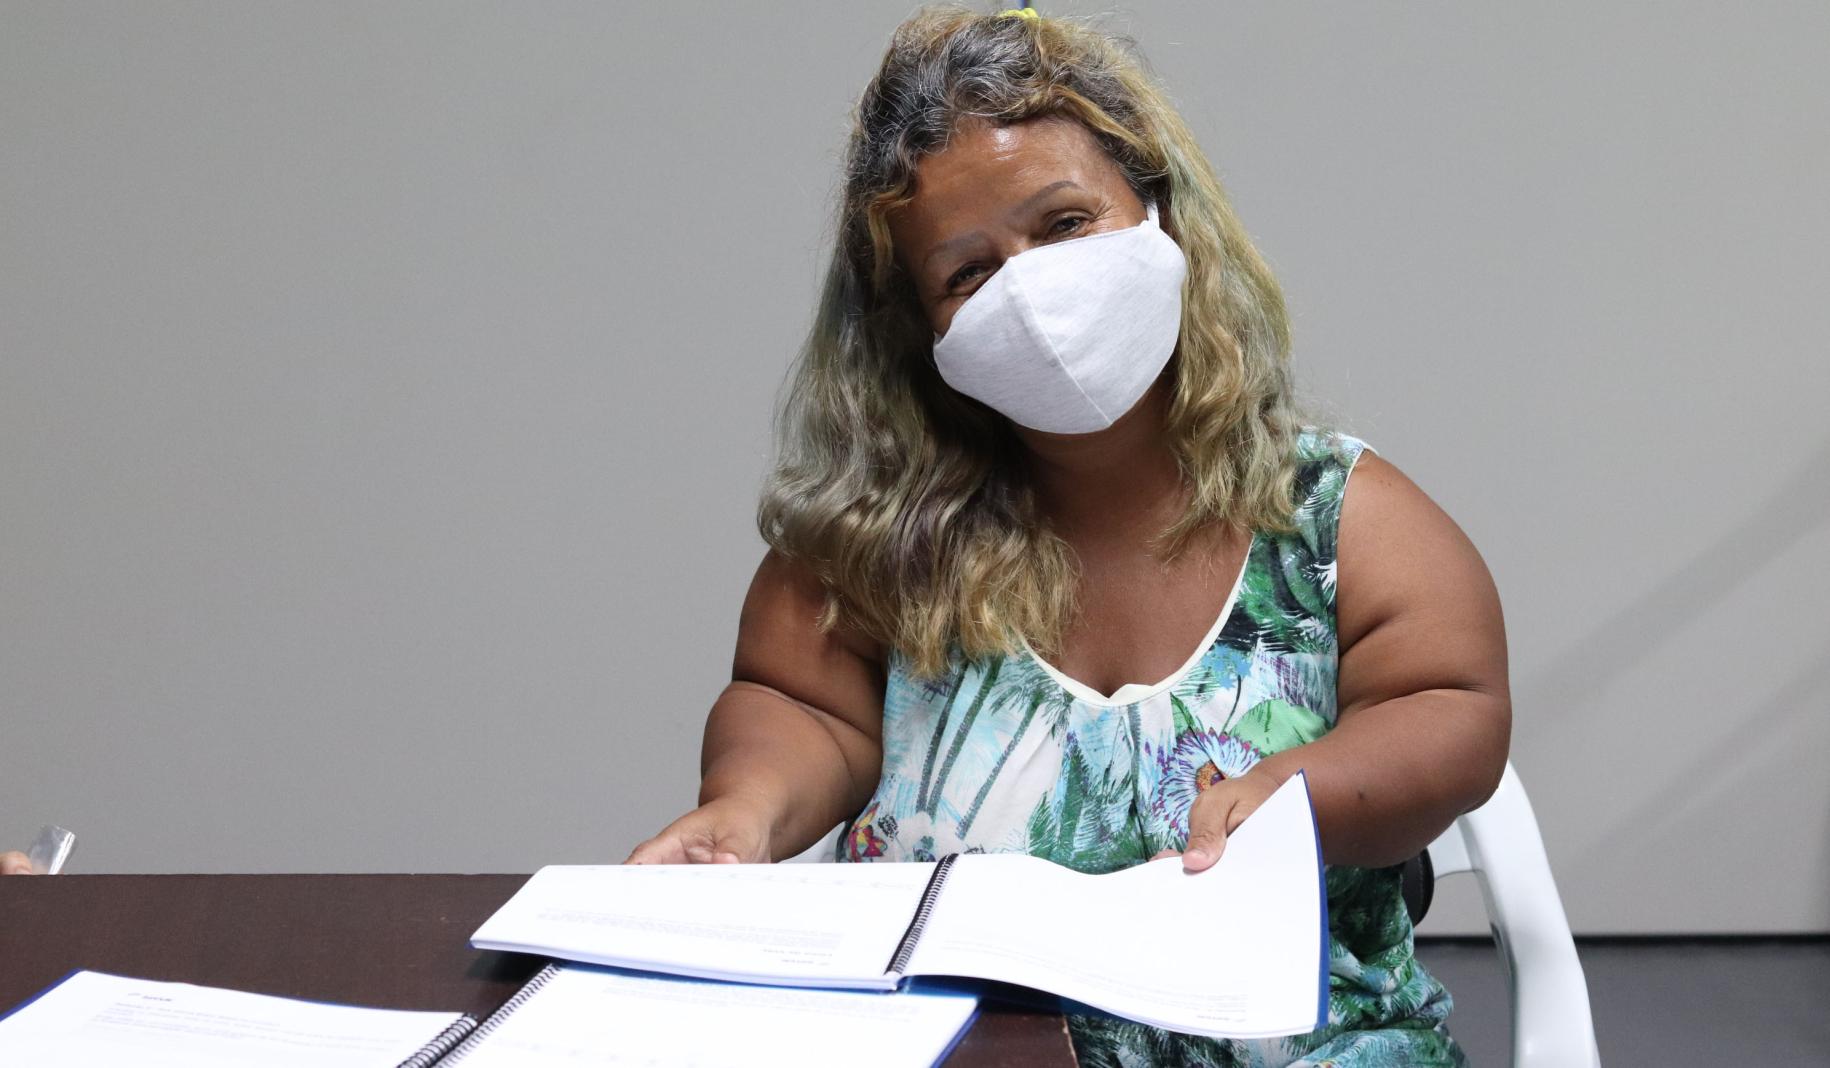 Carmen Bermúdez, age 50, smiles behind her face mask as she sits with training documents.